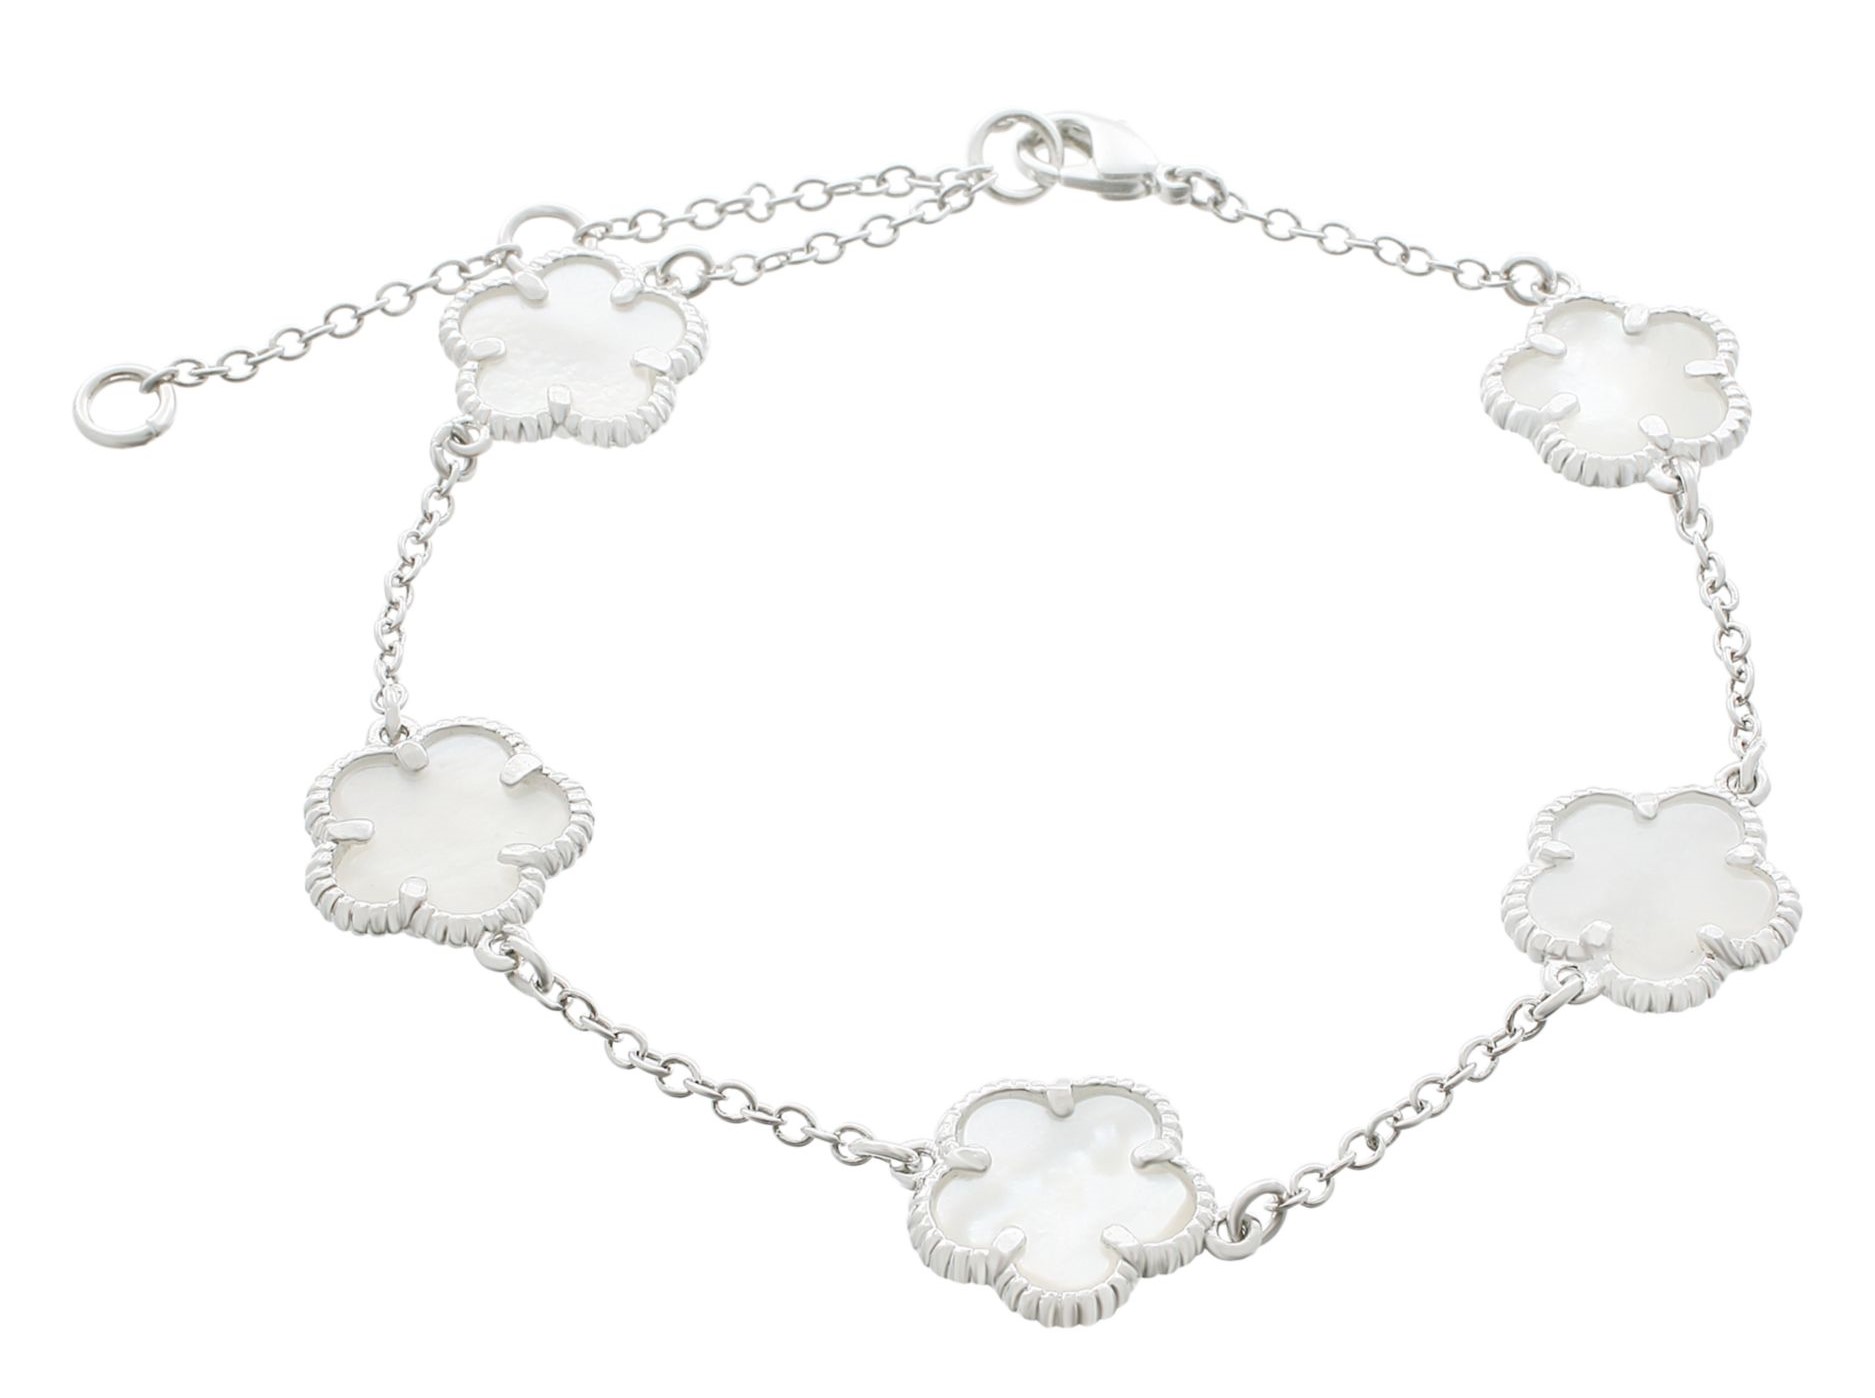 jankuo clover mother-of-pearl charm bracelet dupe